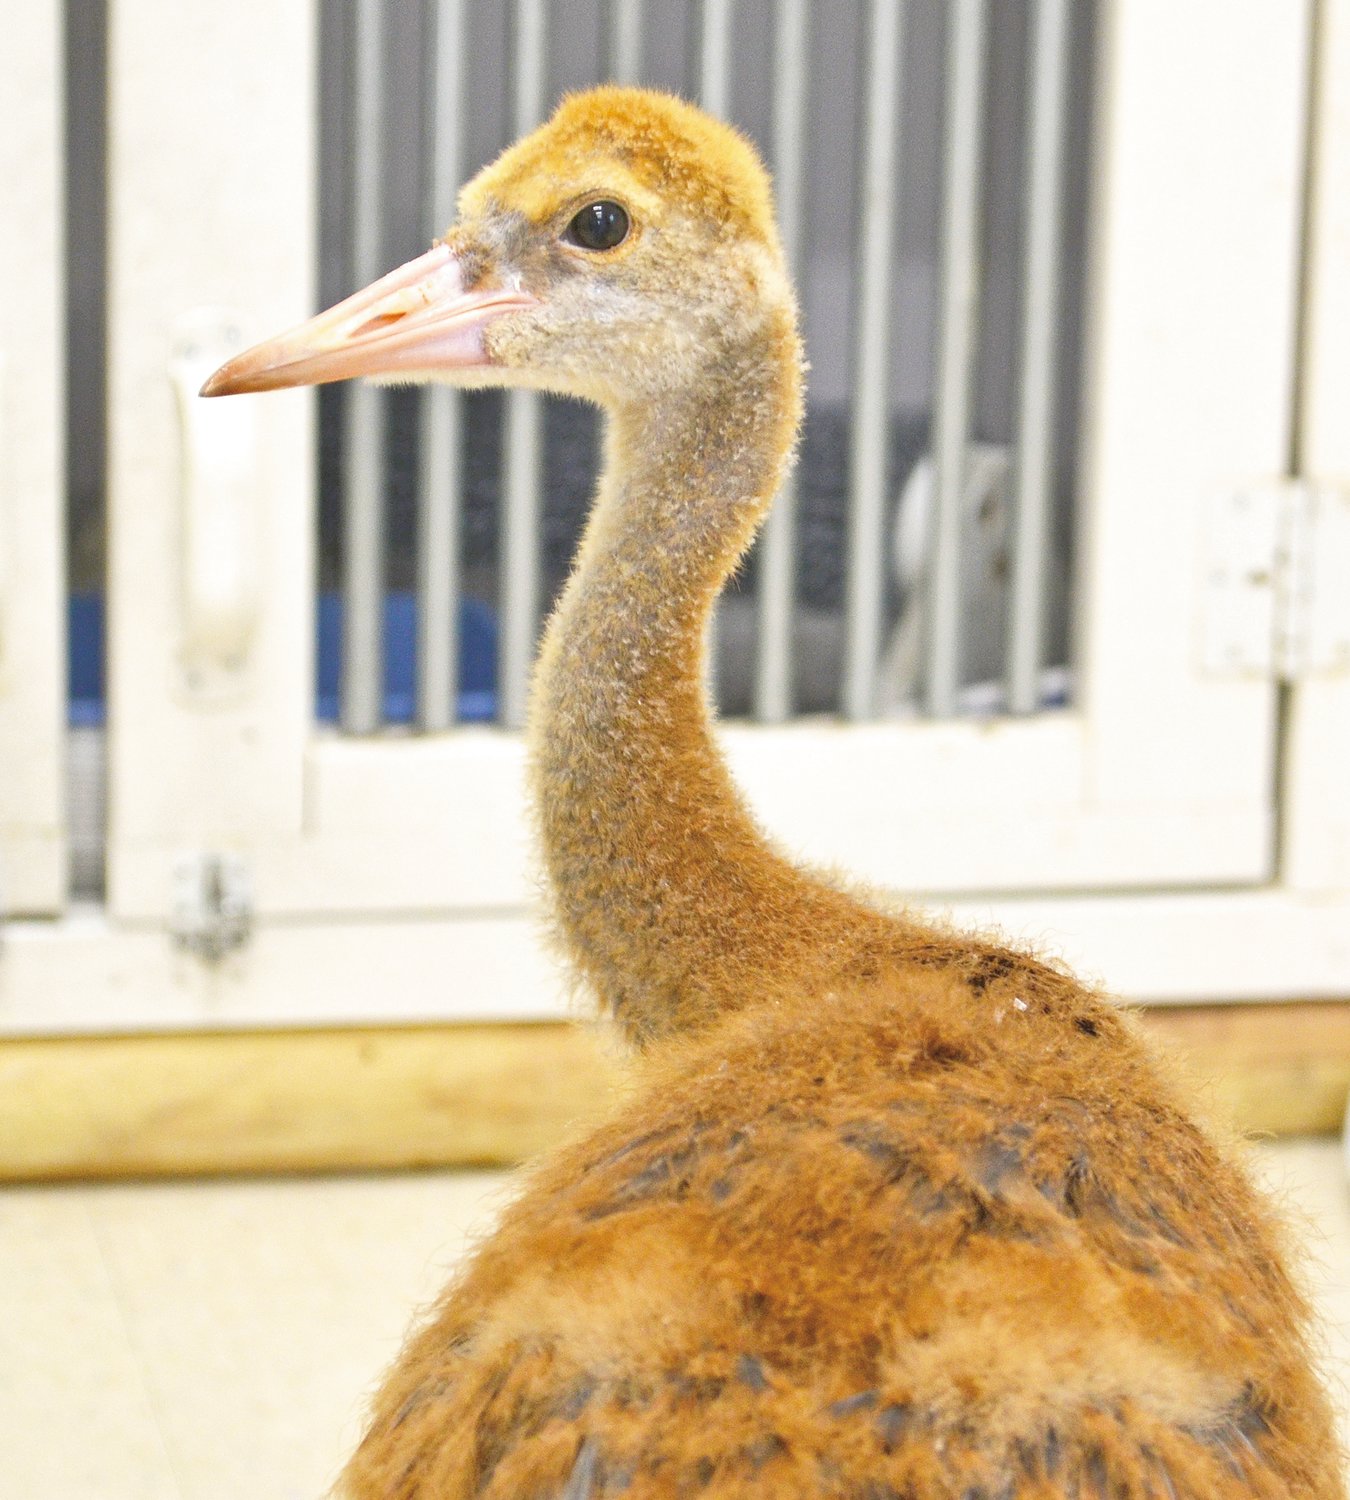 A recovering sandhill crane that was brought into Wildside with two fractured legs. Its next destination is Howell Nature Center.